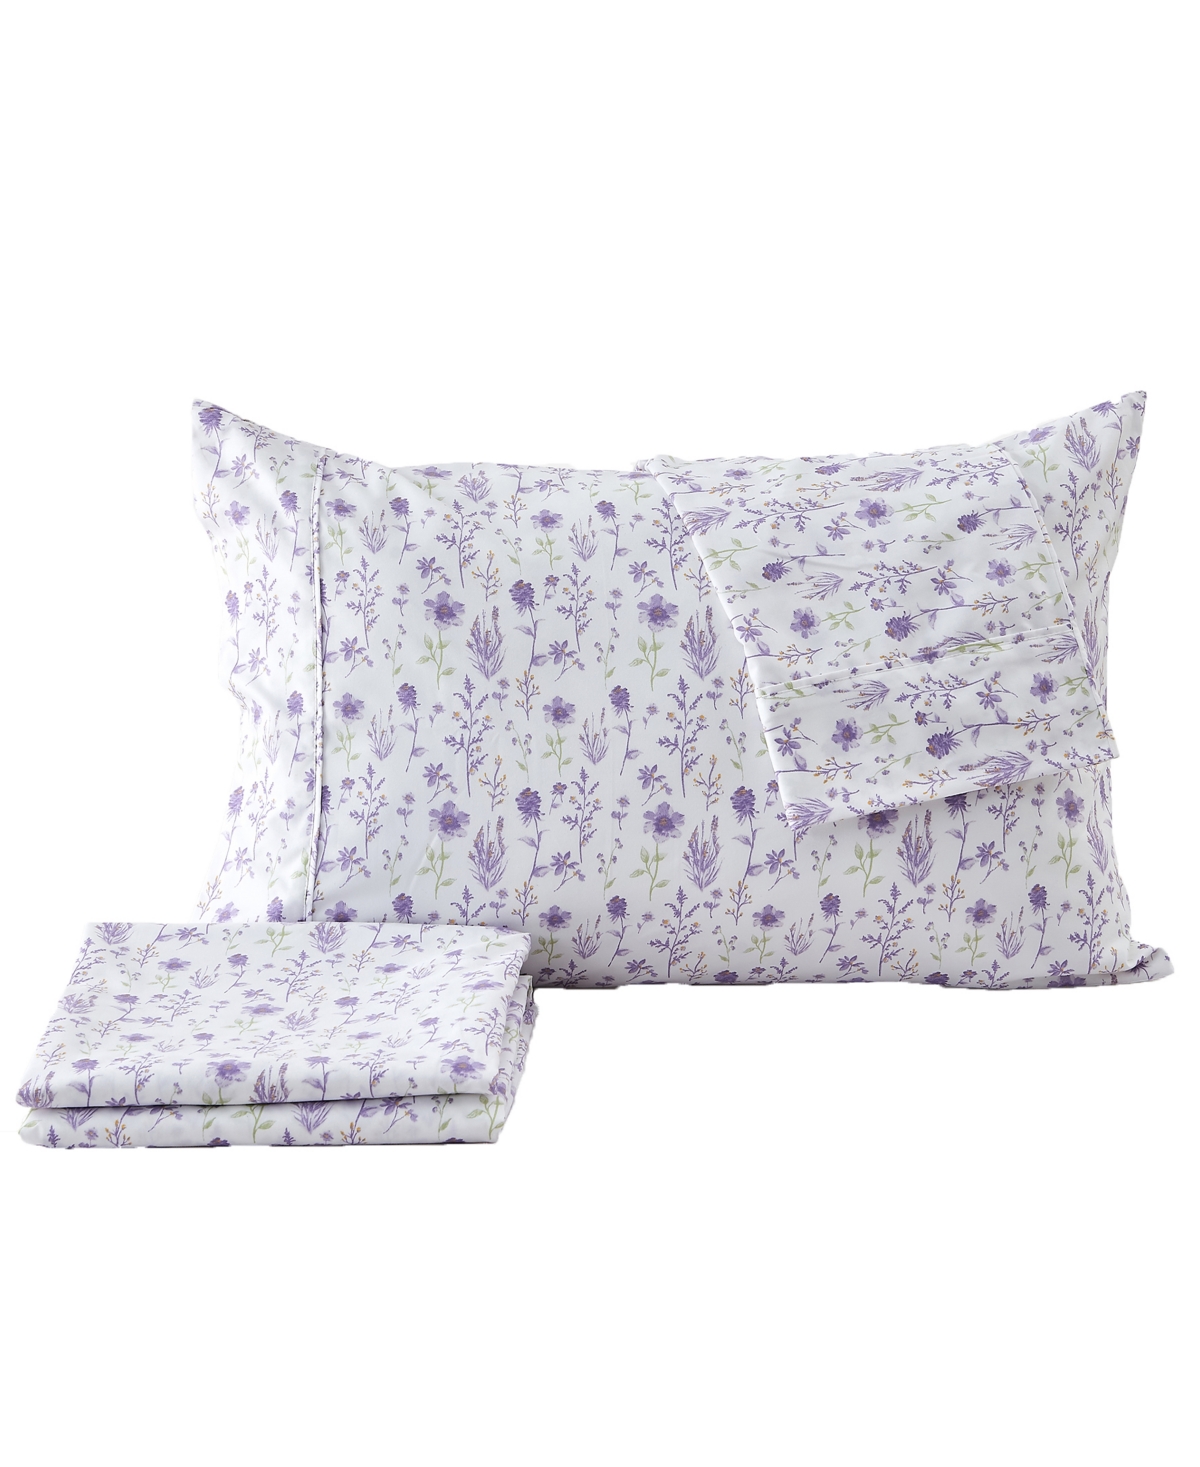 Premium Comforts Floral Microfiber Printed 4 Piece Sheet Set, Queen In Colorful Floral - Lavender